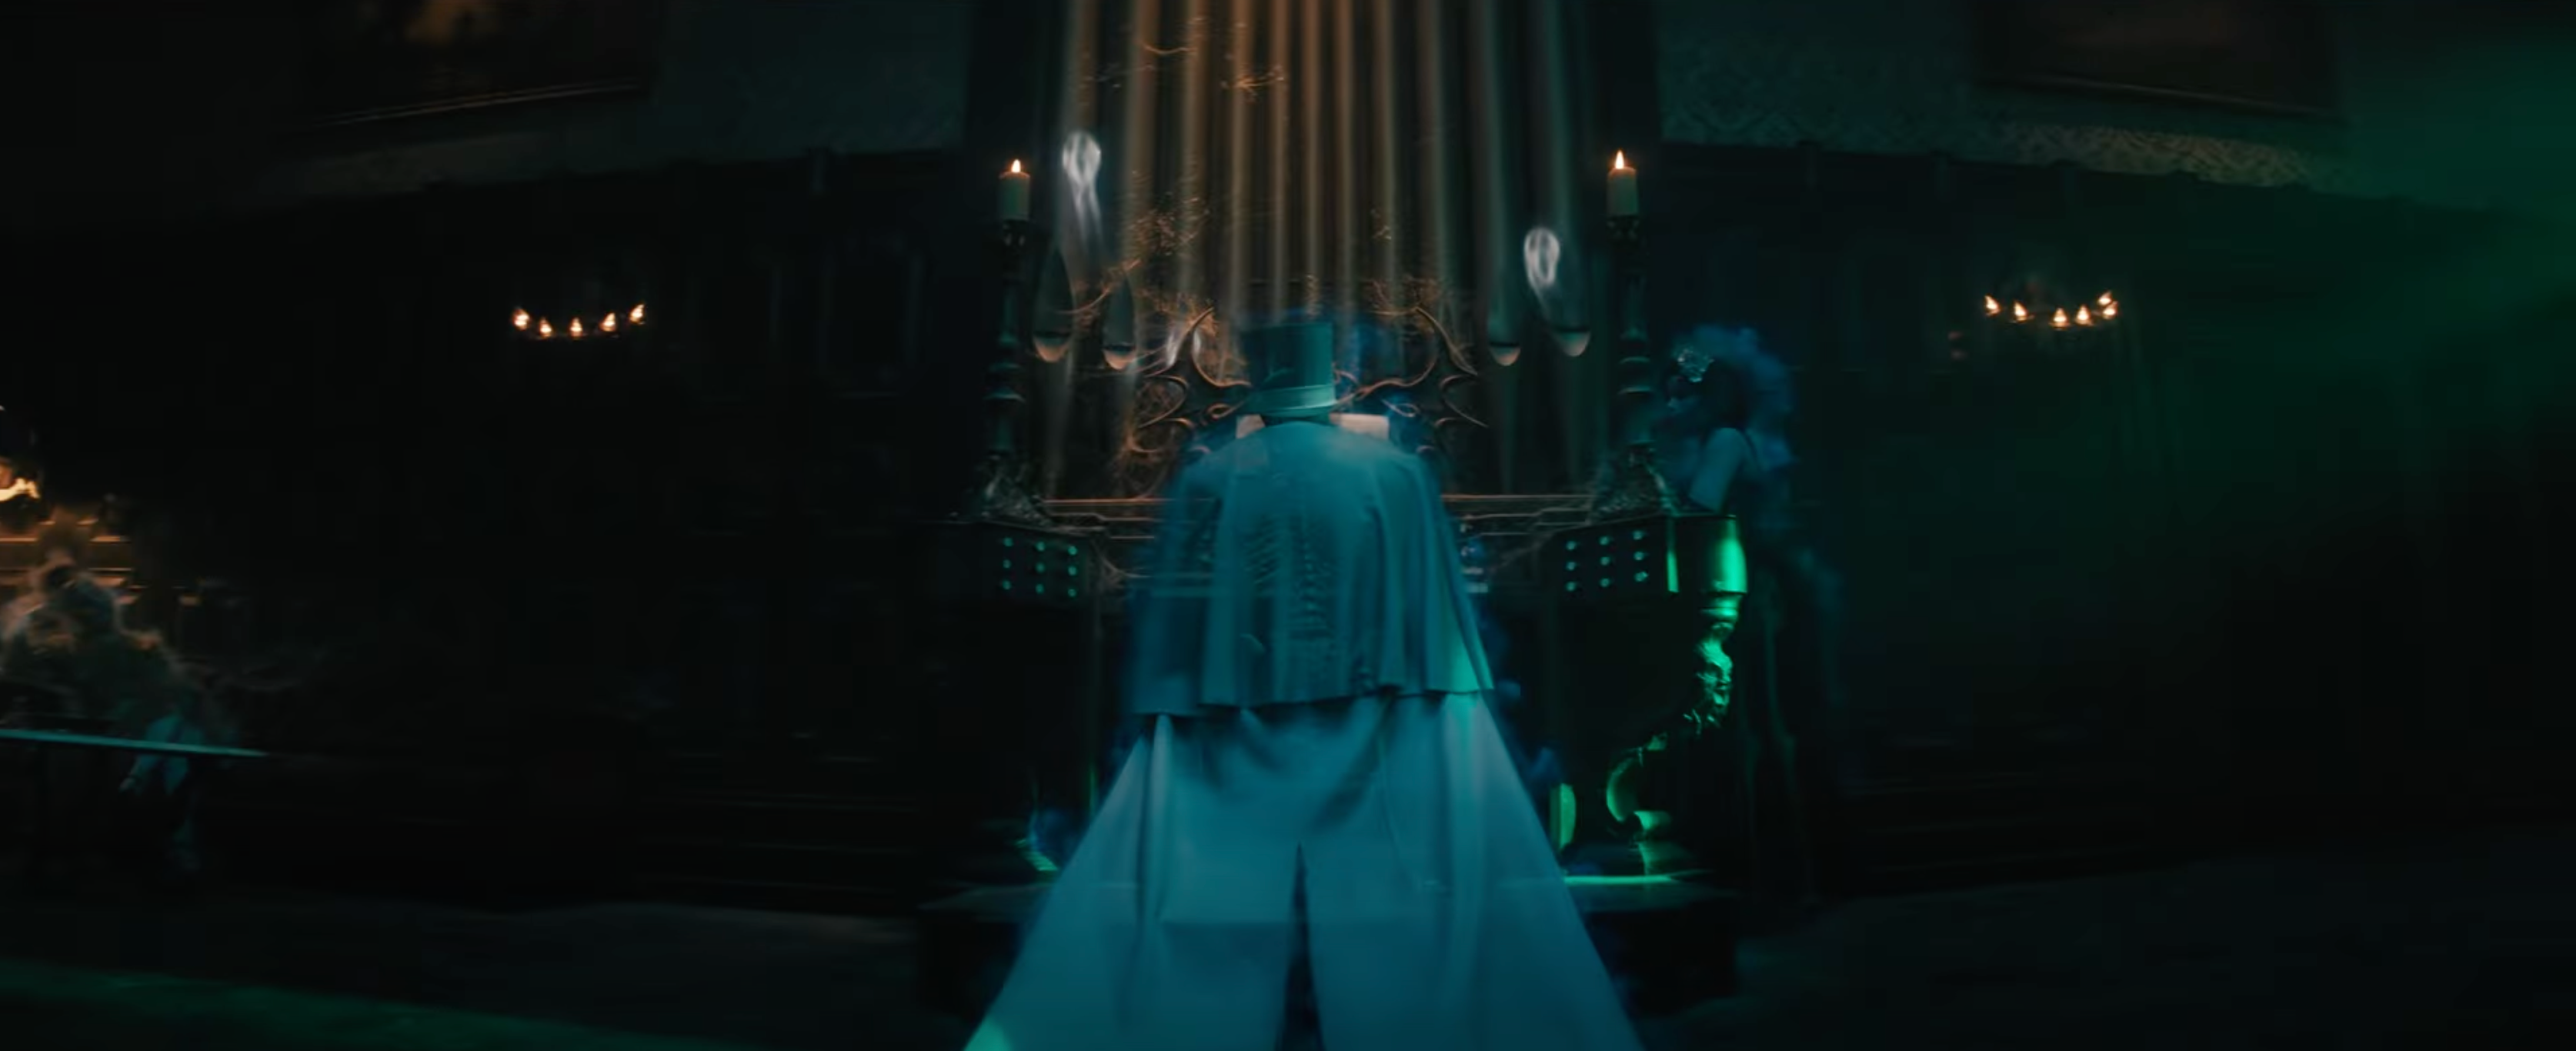 A still of the organist in the ballroom from the haunted mansion trailer